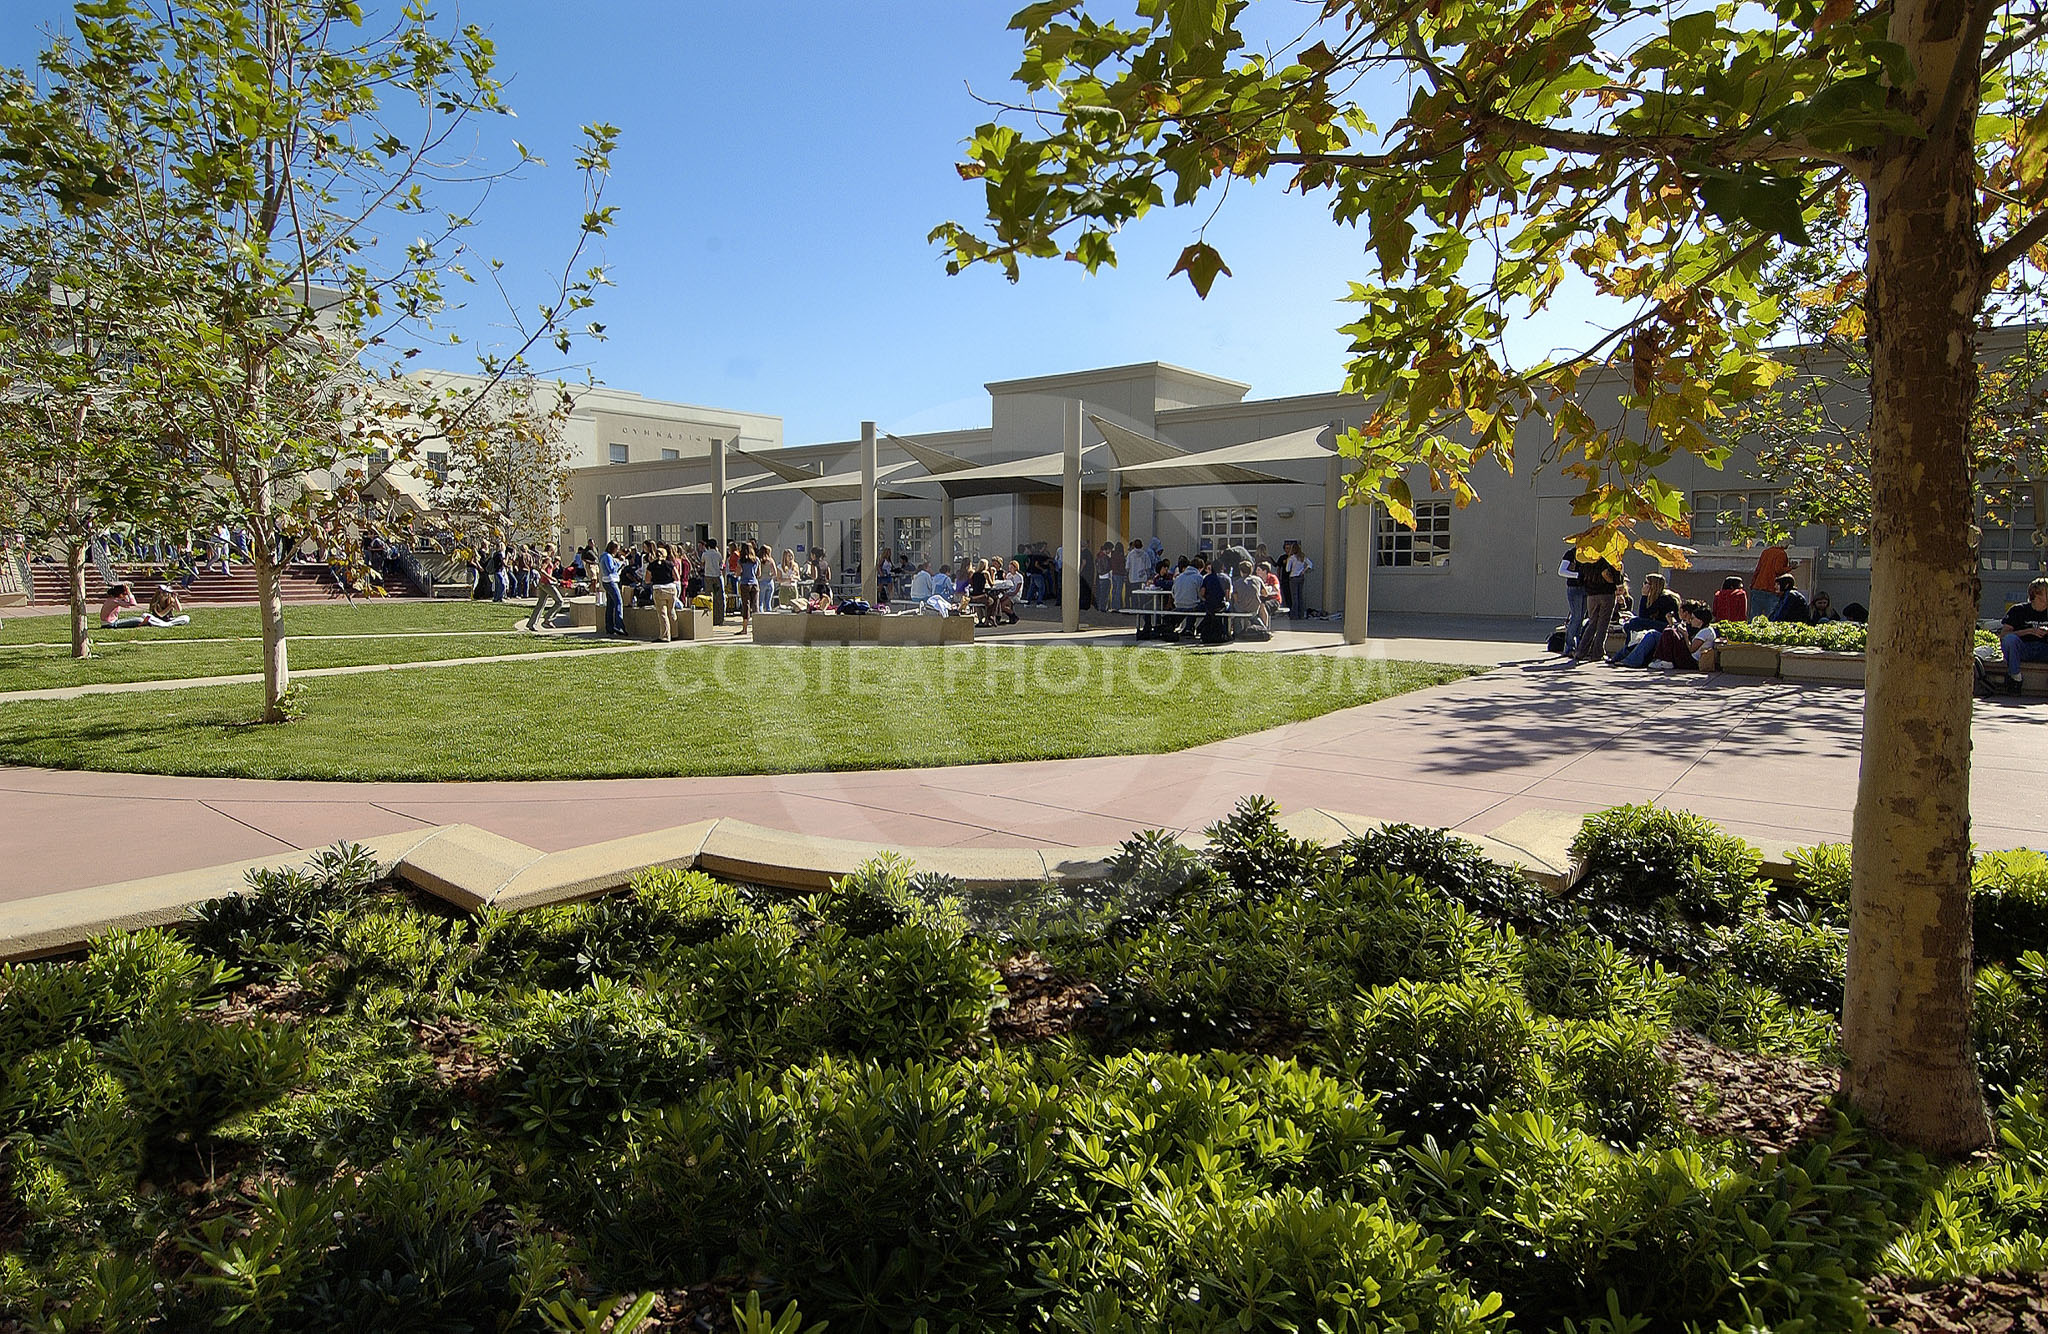 Large Courtyard with students